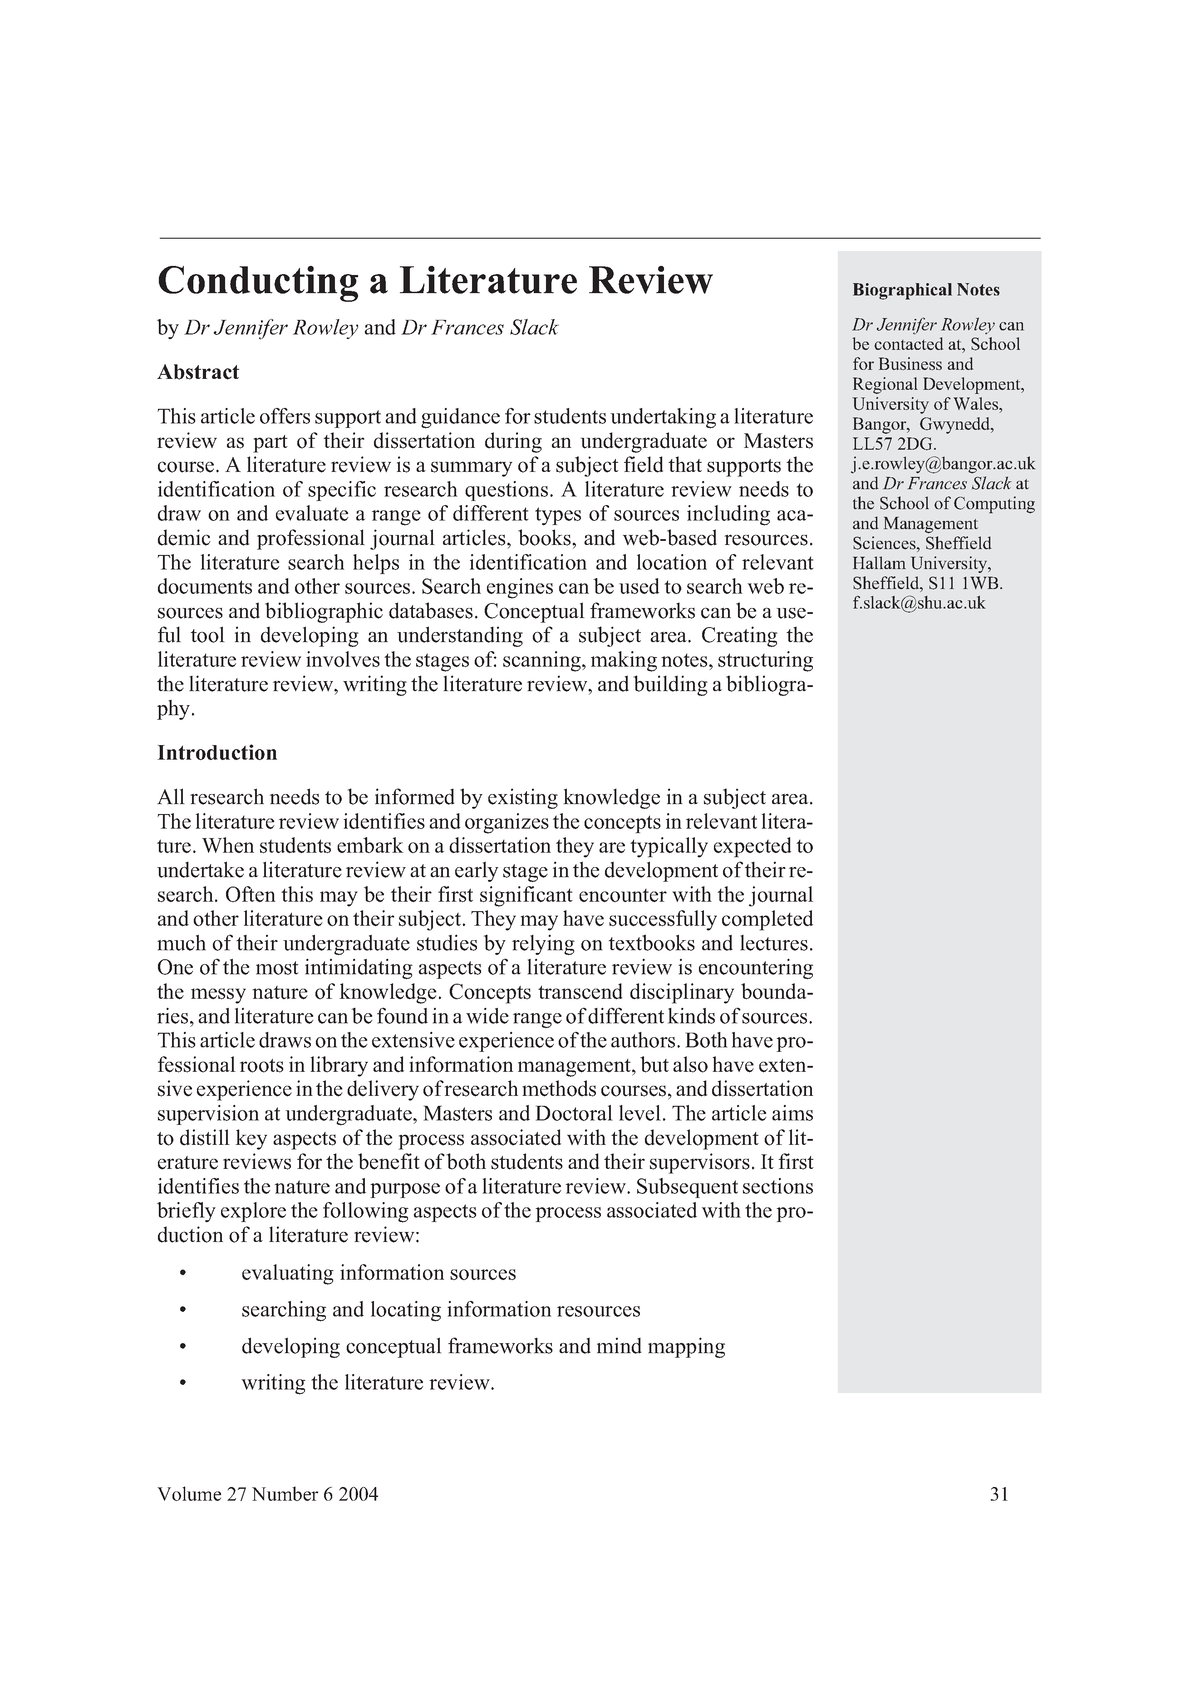 conducting a literature review article